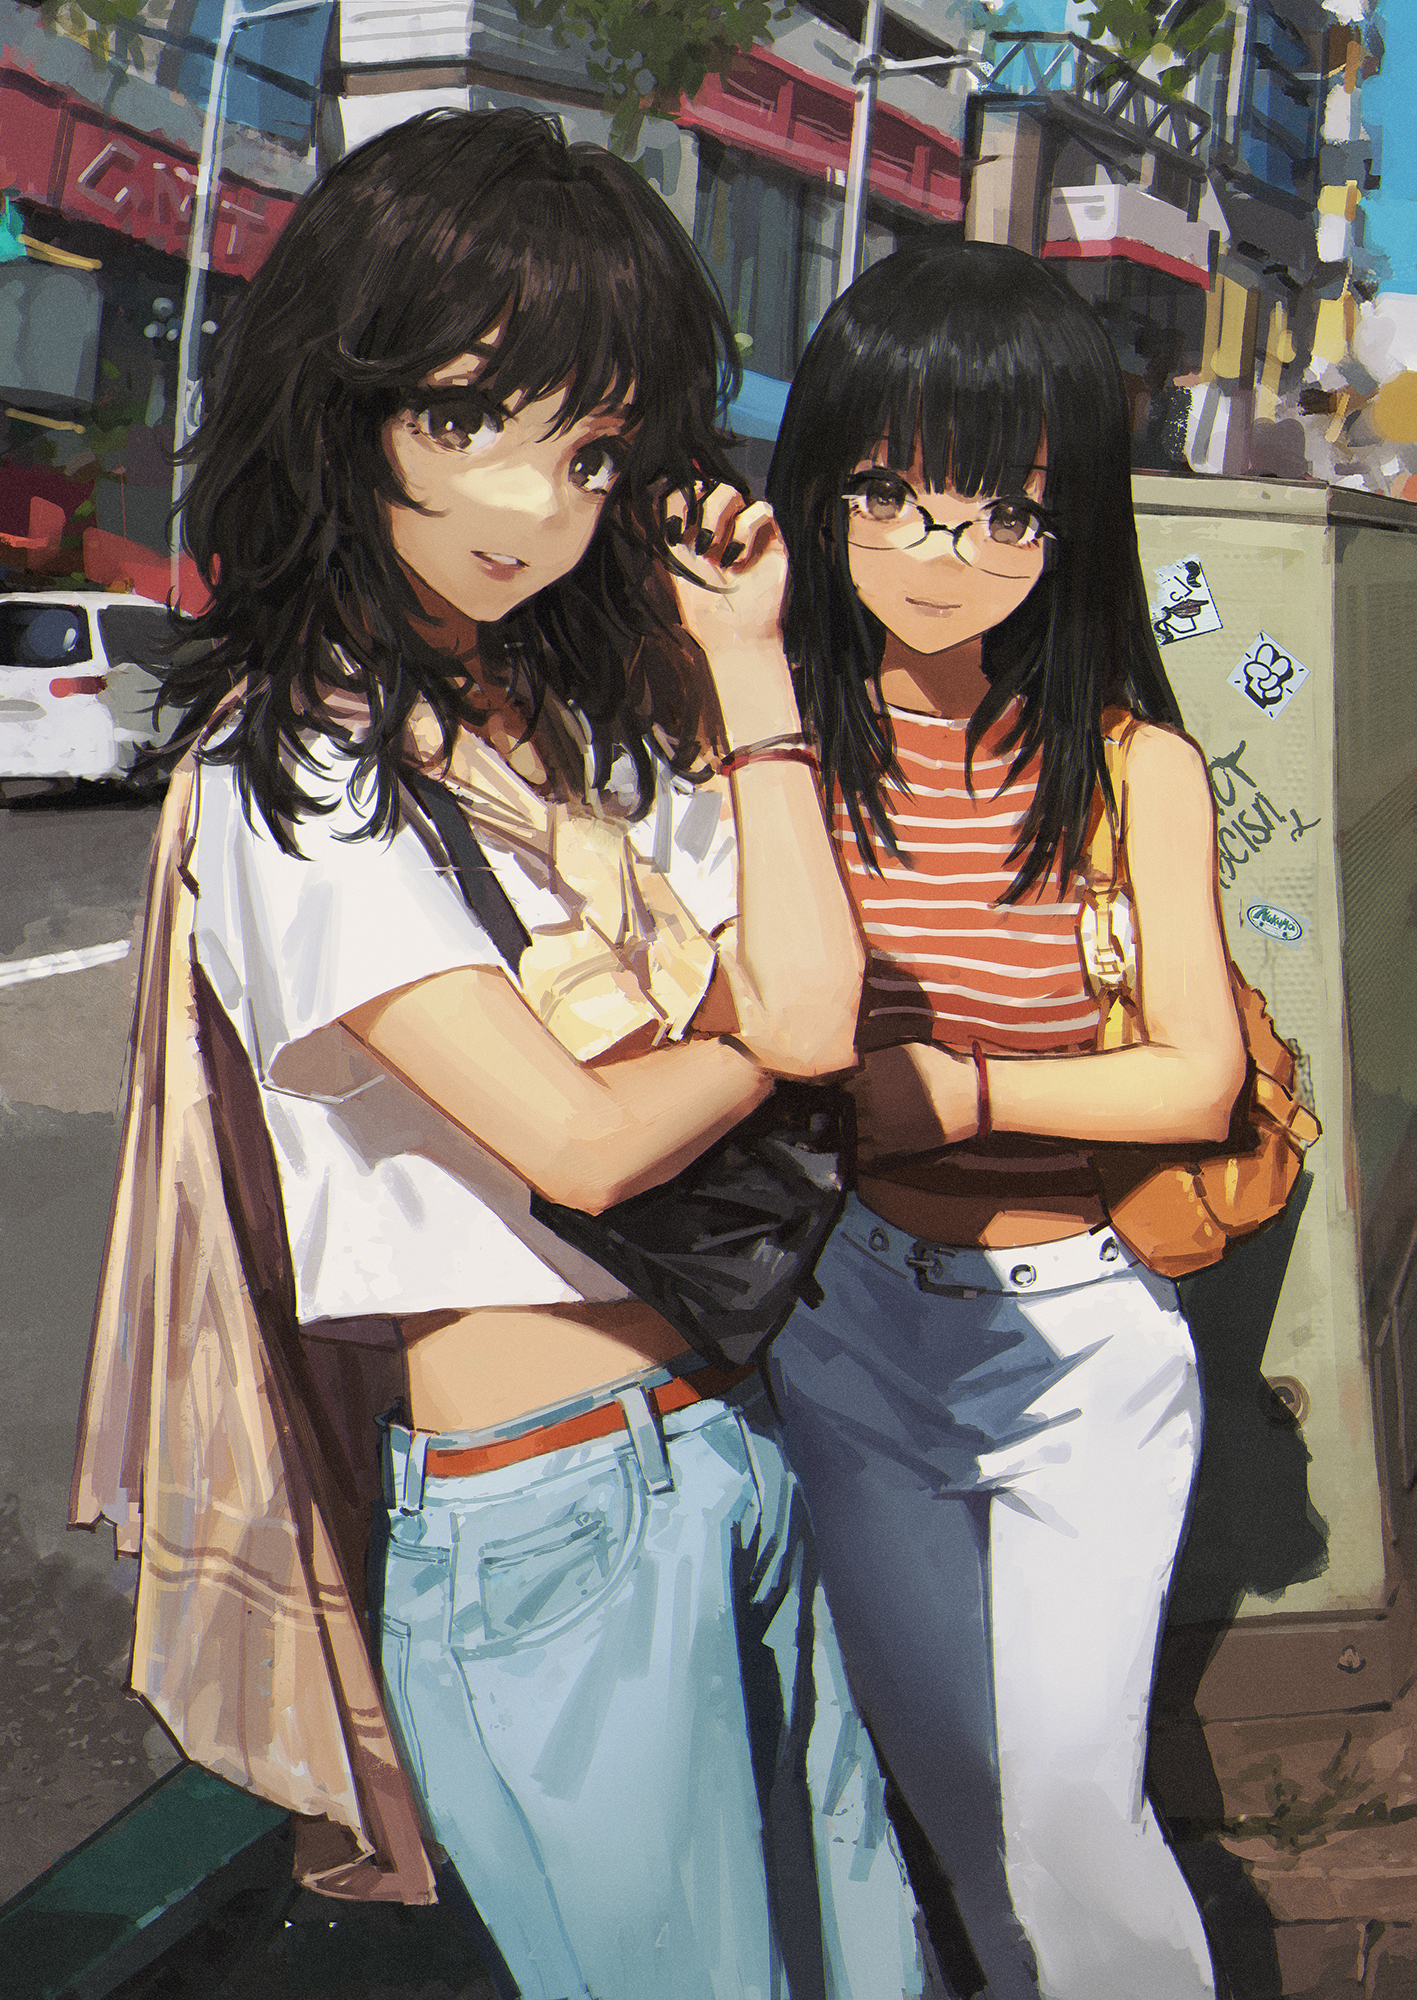 Anime 1417x2000 Wang Xi anime girls dark hair black hair smiling painting jeans looking at viewer portrait display standing long hair closed mouth parted lips sunlight short sleeves purse sleeveless shirt vehicle road bare midriff outdoors women outdoors car